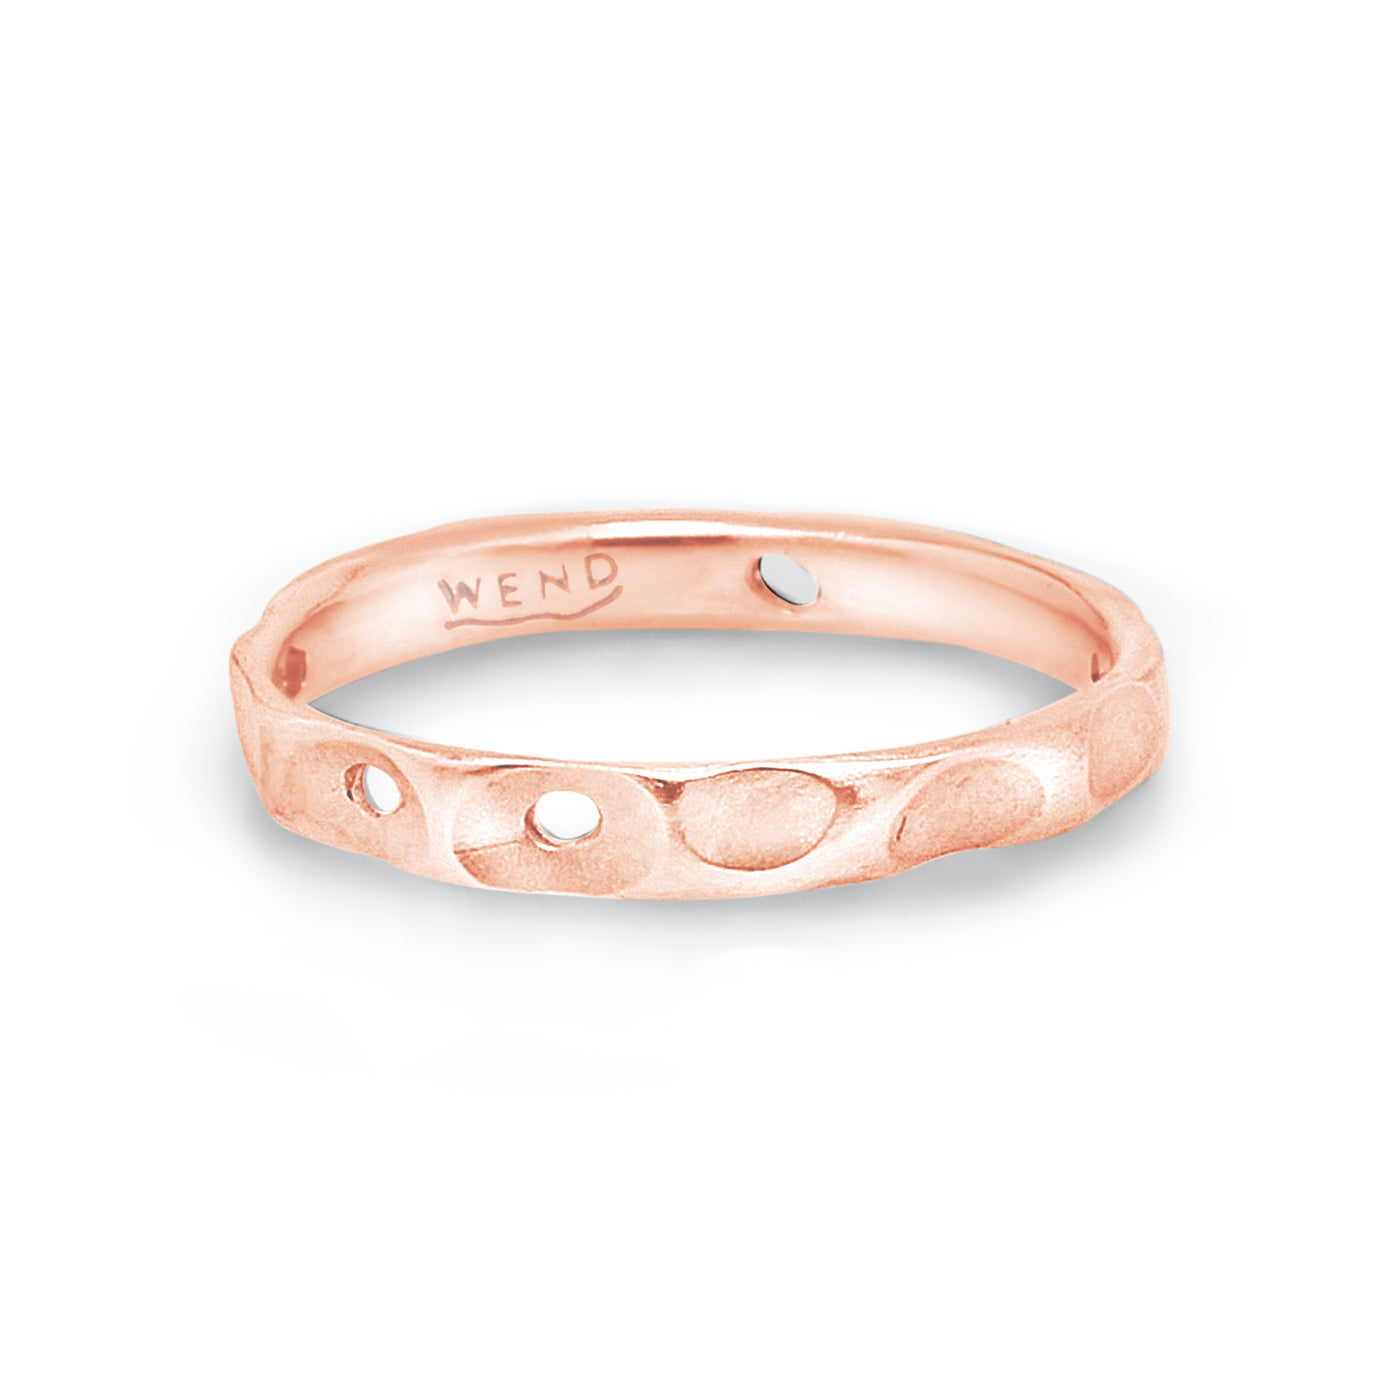 Tidepools ring band inspired by ocean tide pools made from certified recycled gold by WEND Jewelry #width_thin